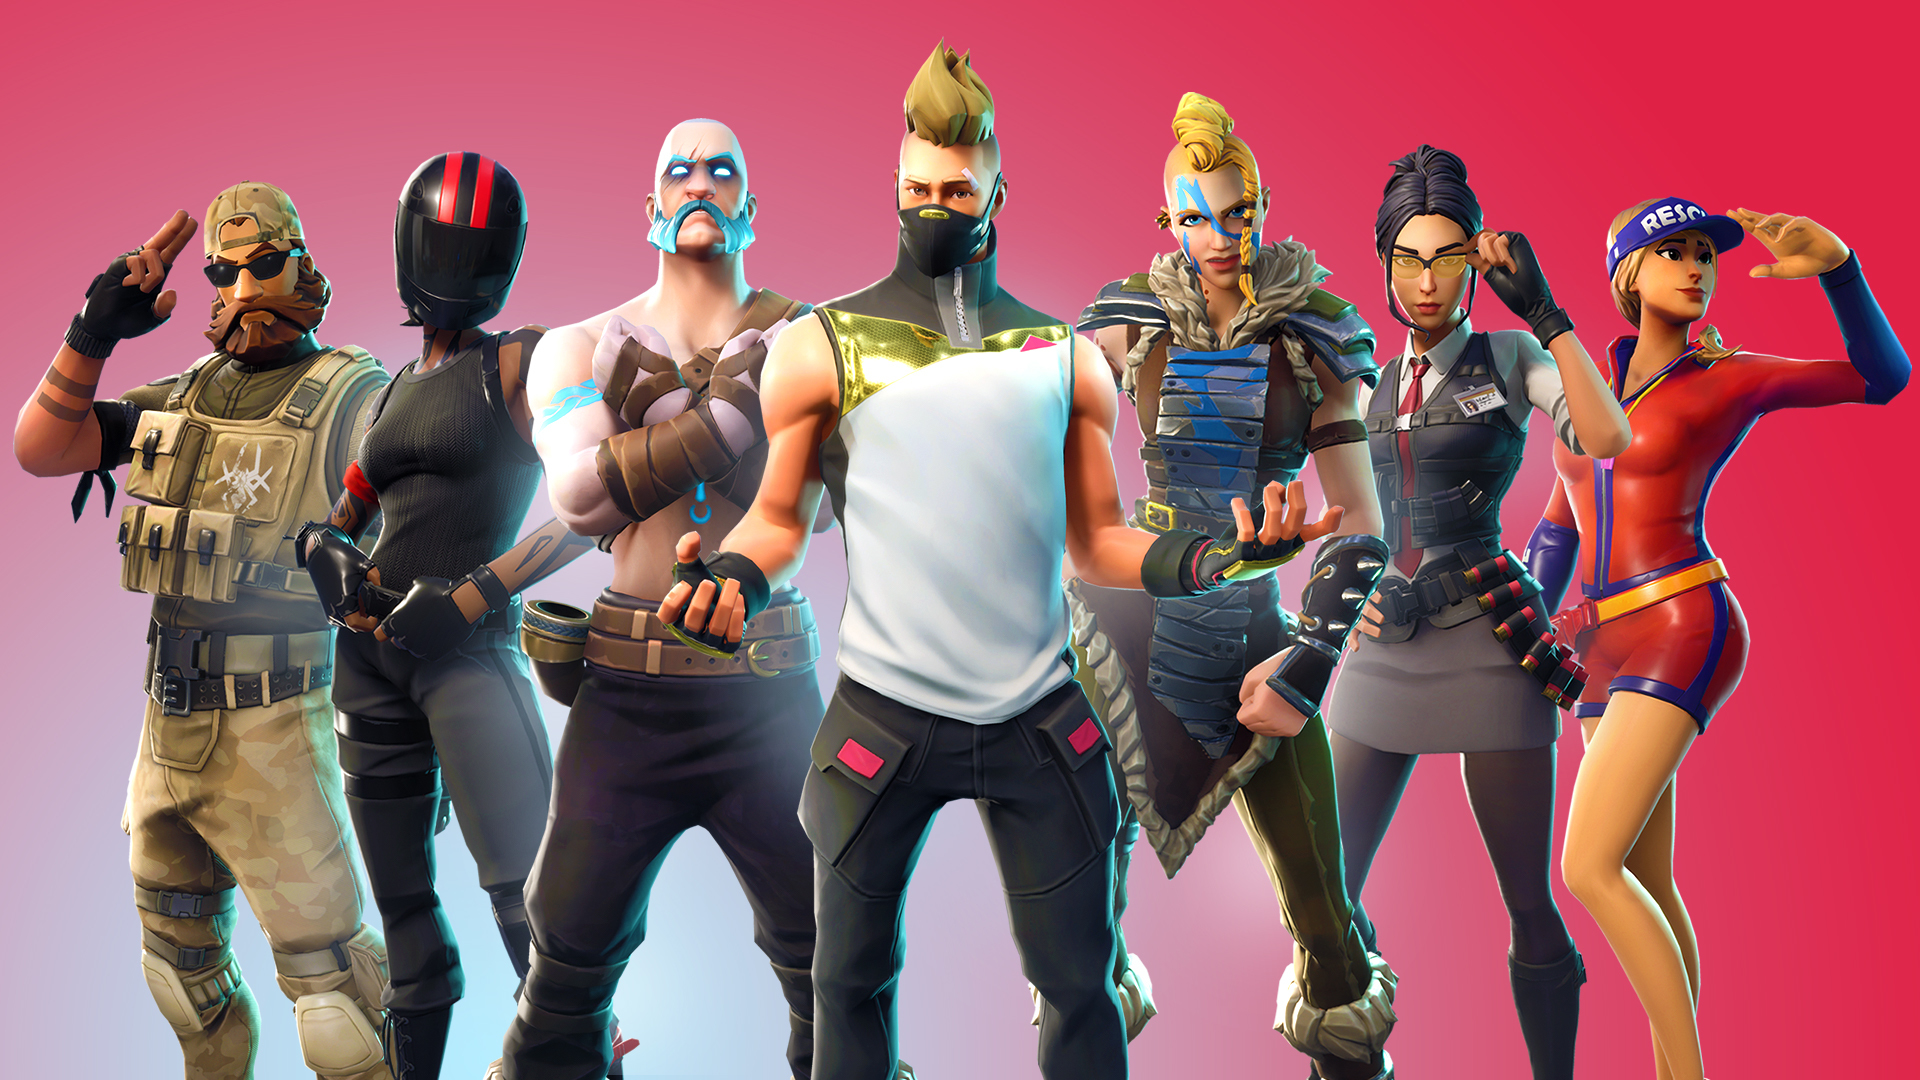 Fortnite v5.20 Patch Notes include new Double Barrel Shotgun, GPU optimization on the Switch and the ability to open the Challenge menu in-game